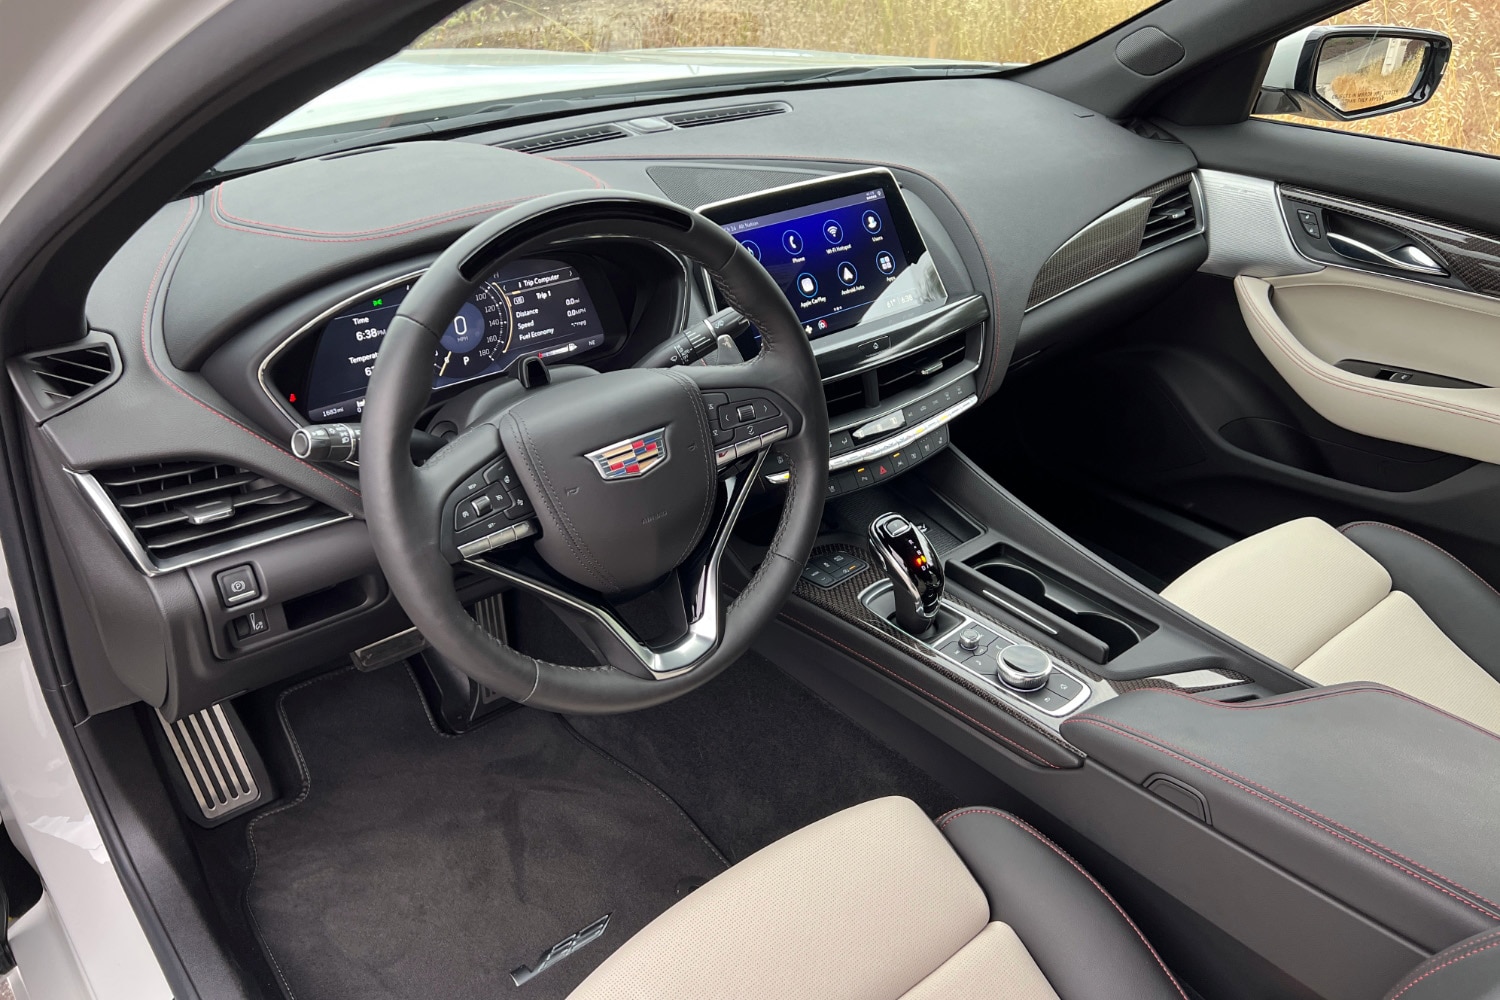 Interior view of the 2023 Cadillac CT5-V showing the two-tone seats and dashboard